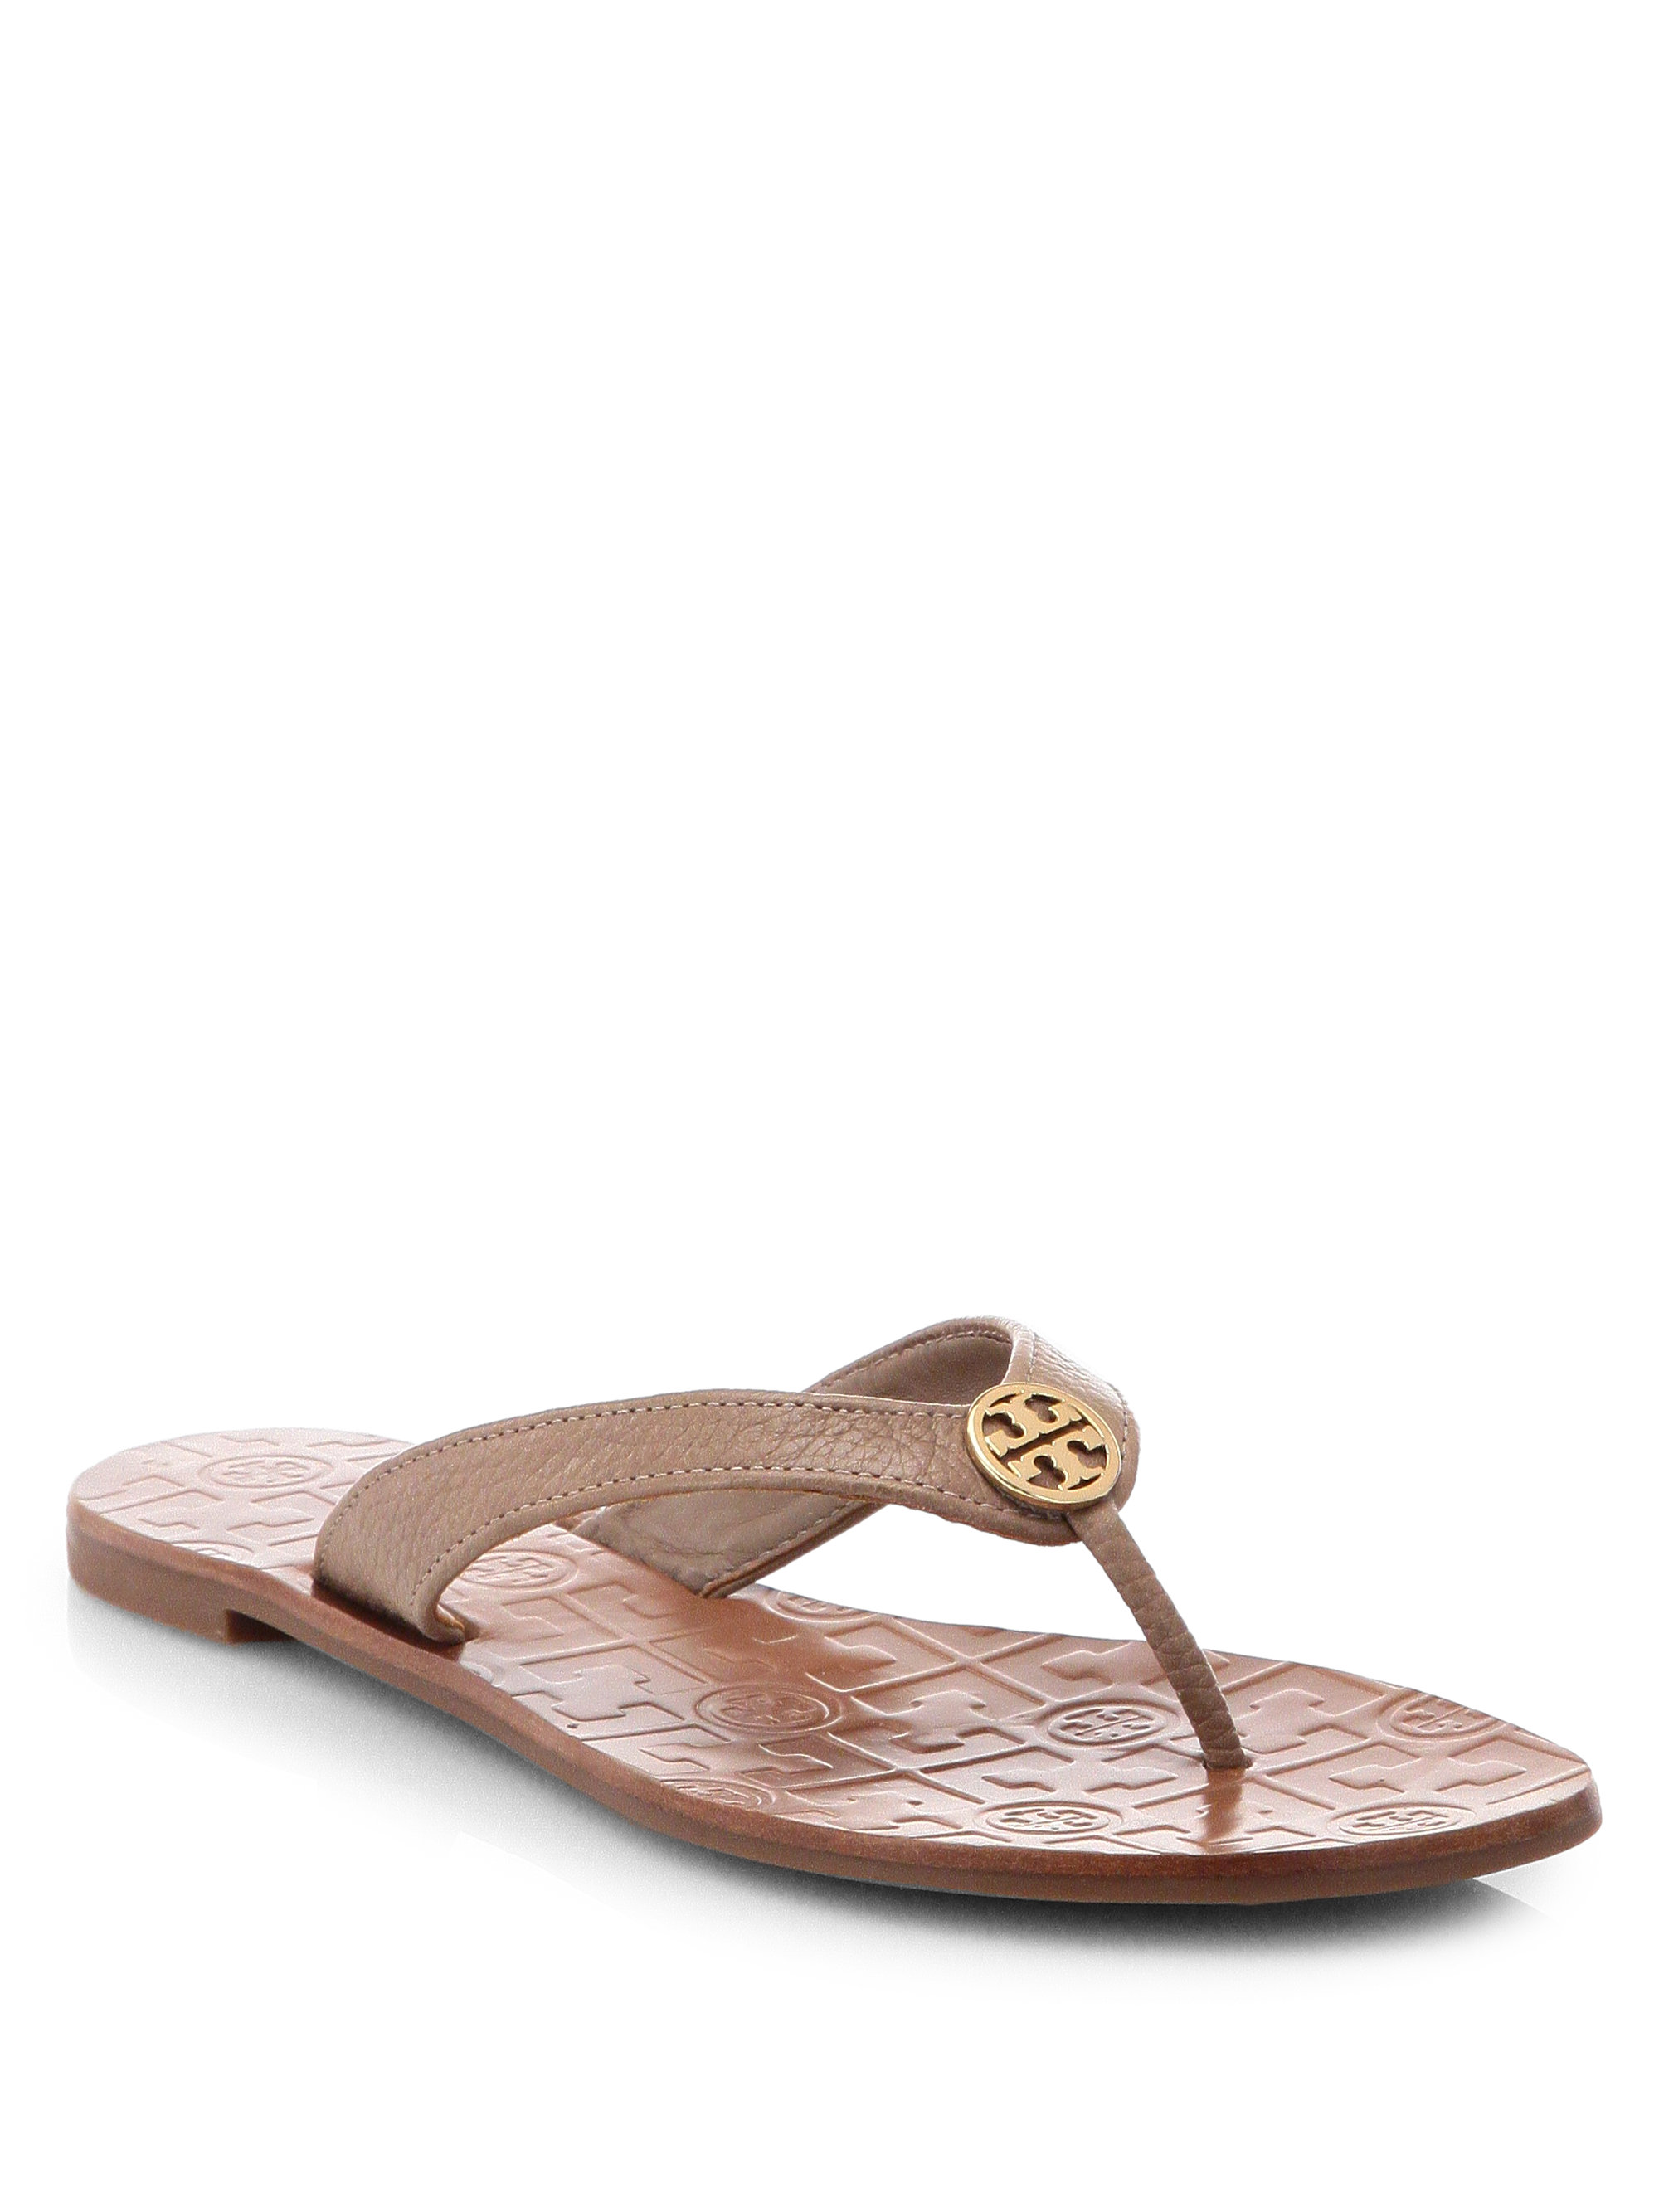 Tory burch Leather Thong Sandal with Signature Logo in Brown | Lyst